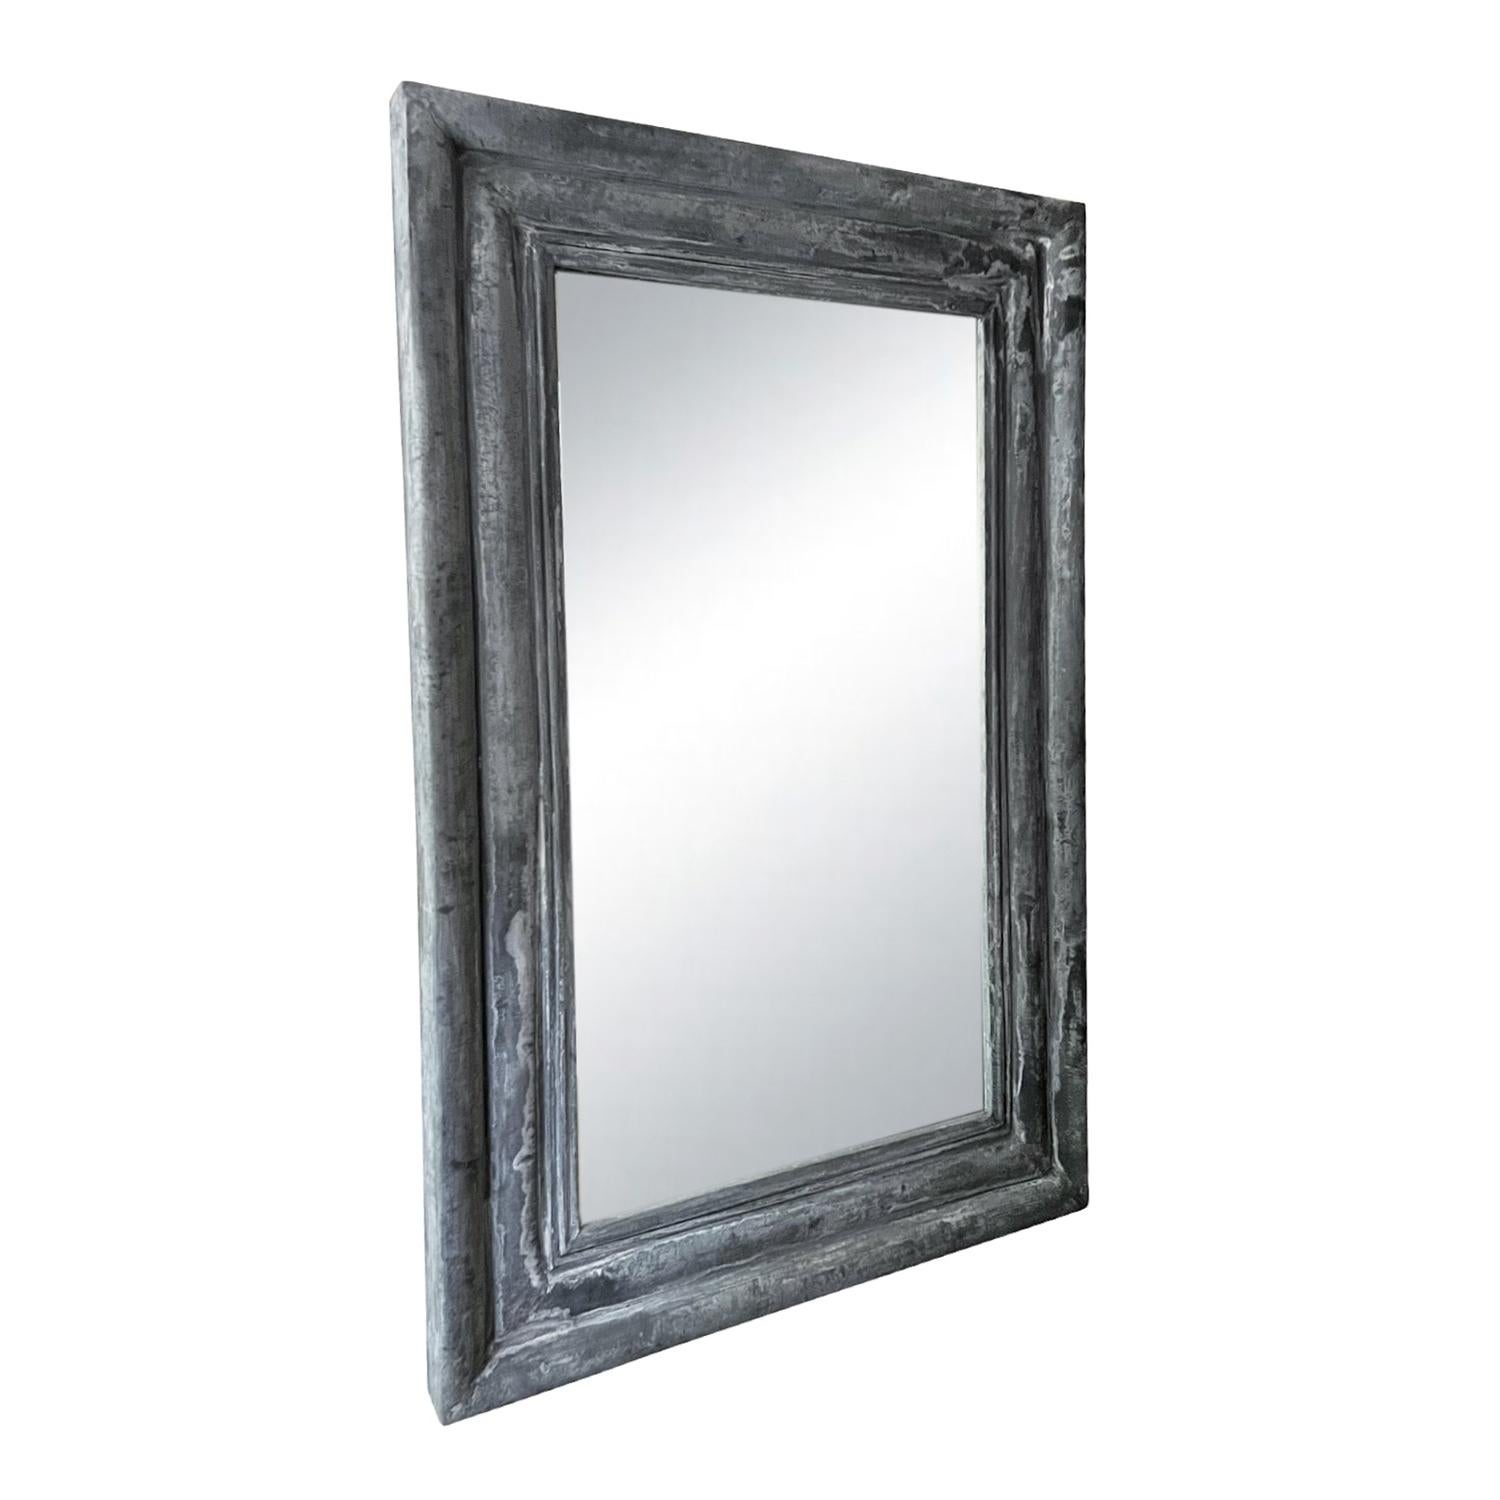 Oversized mirror with a heavy antique zinc bevelled frame. Wear consistent with age and use. Circa 1930, France.